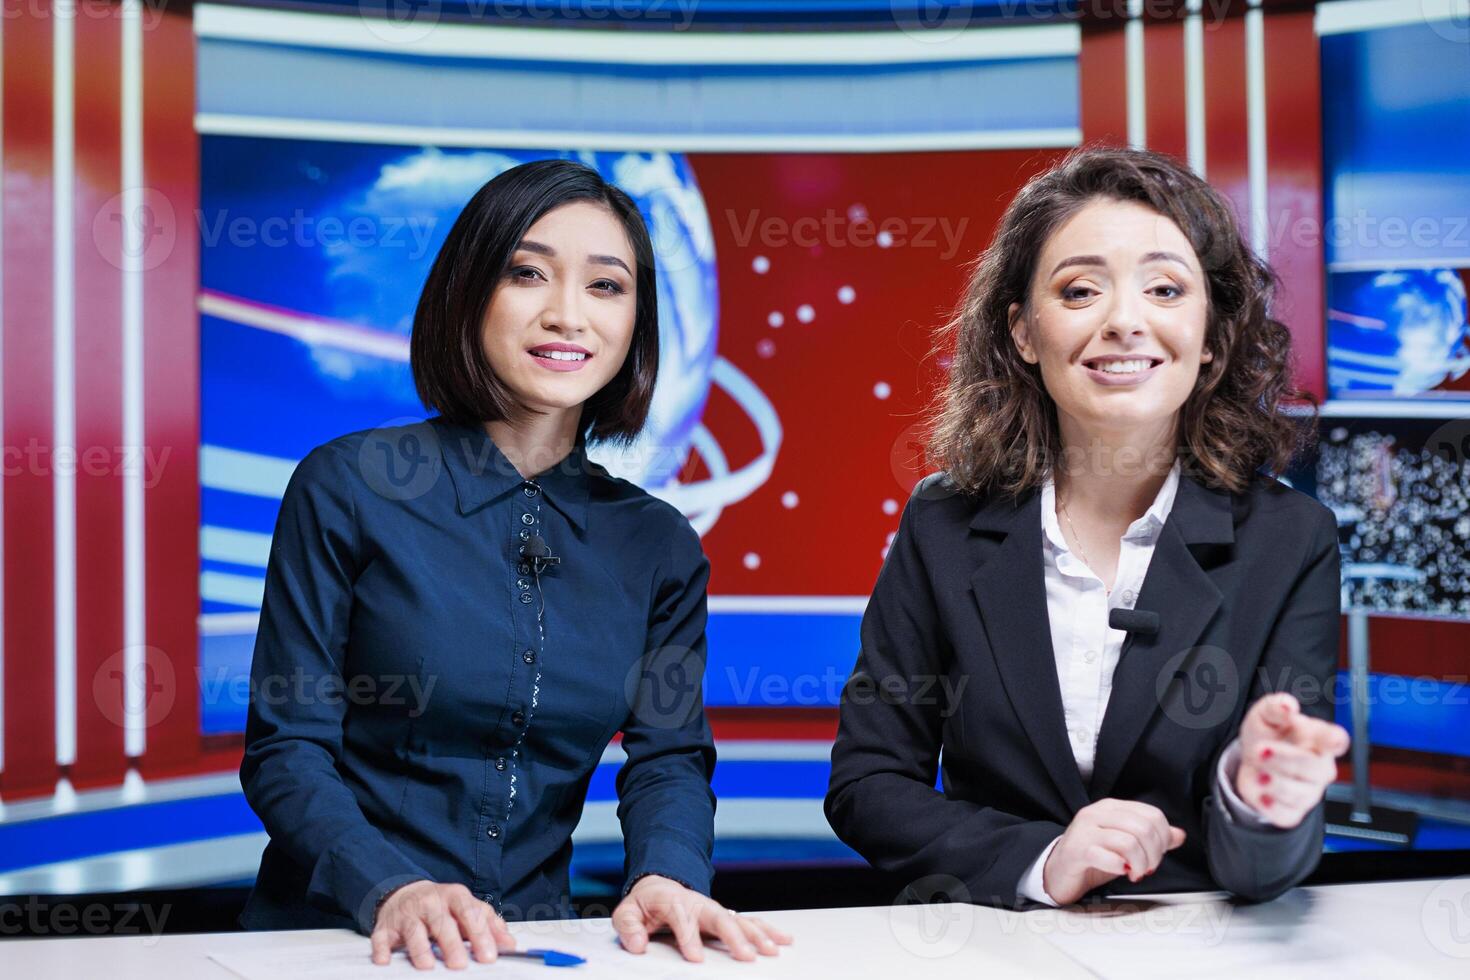 Morning talk show hosts present news, reporting live information about global events with professional tv reportage. Media journalists working on entertainment segment doing newscast. photo